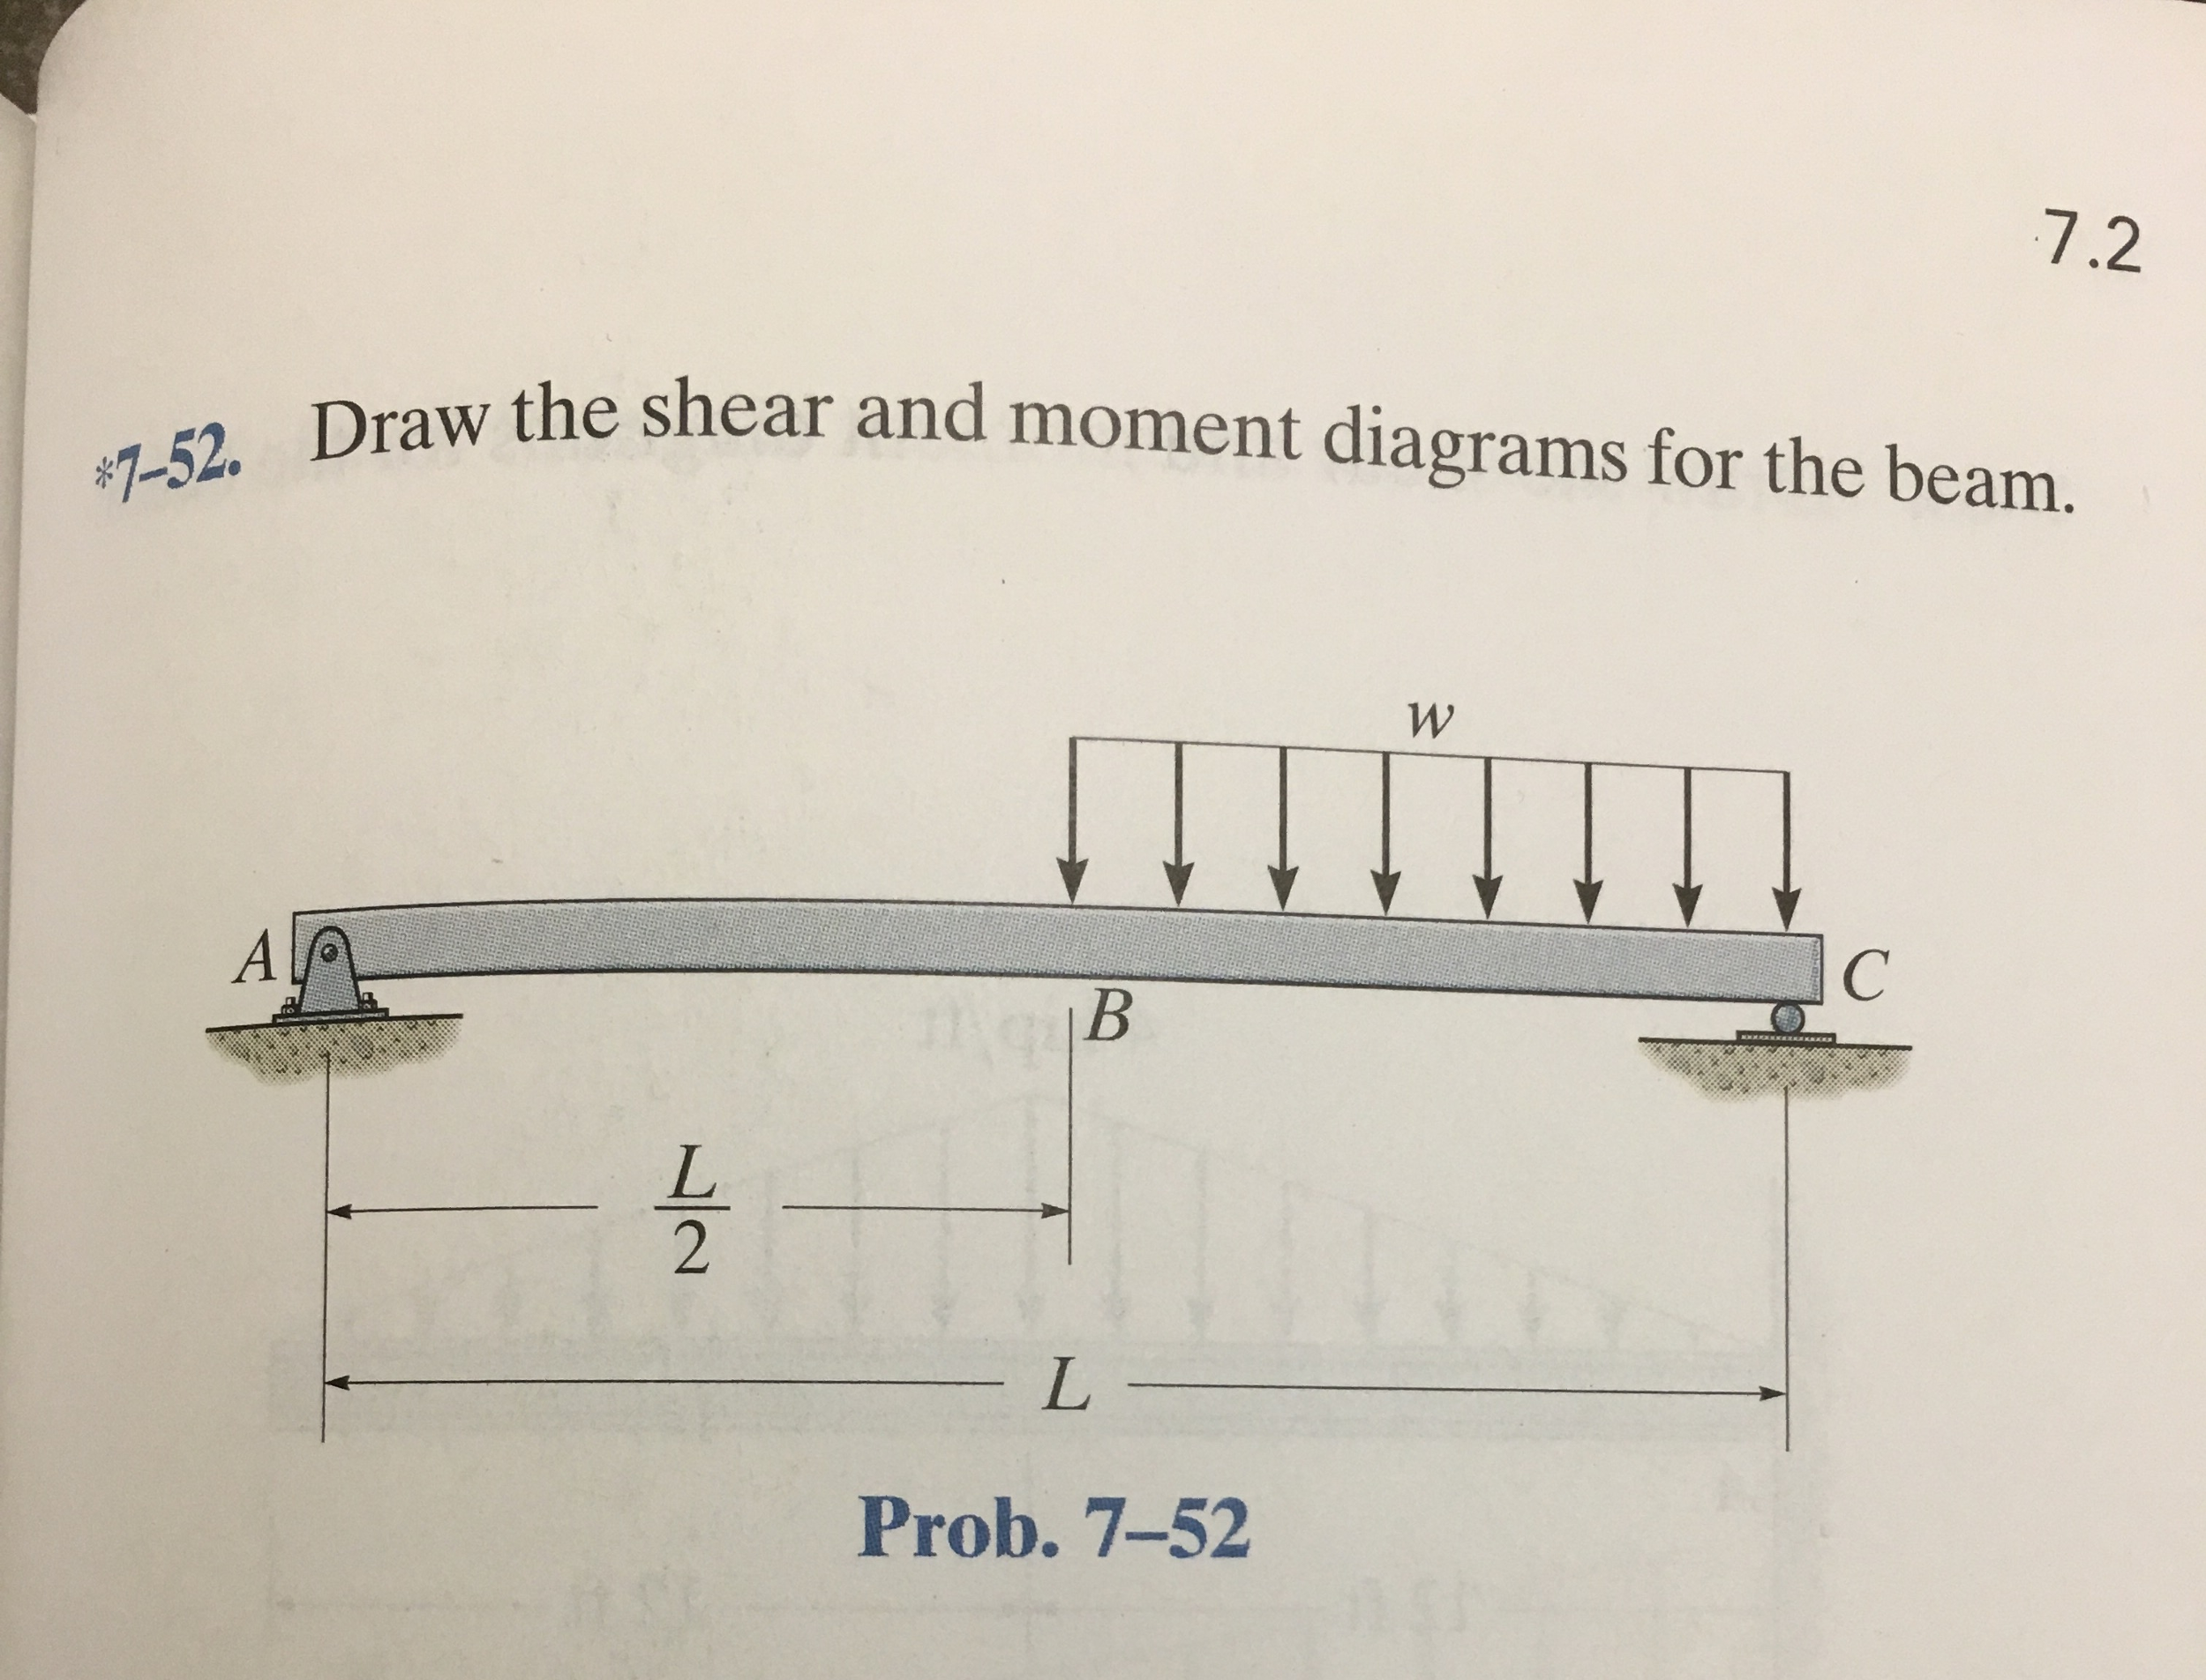 Beam Shear And Moment Diagrams